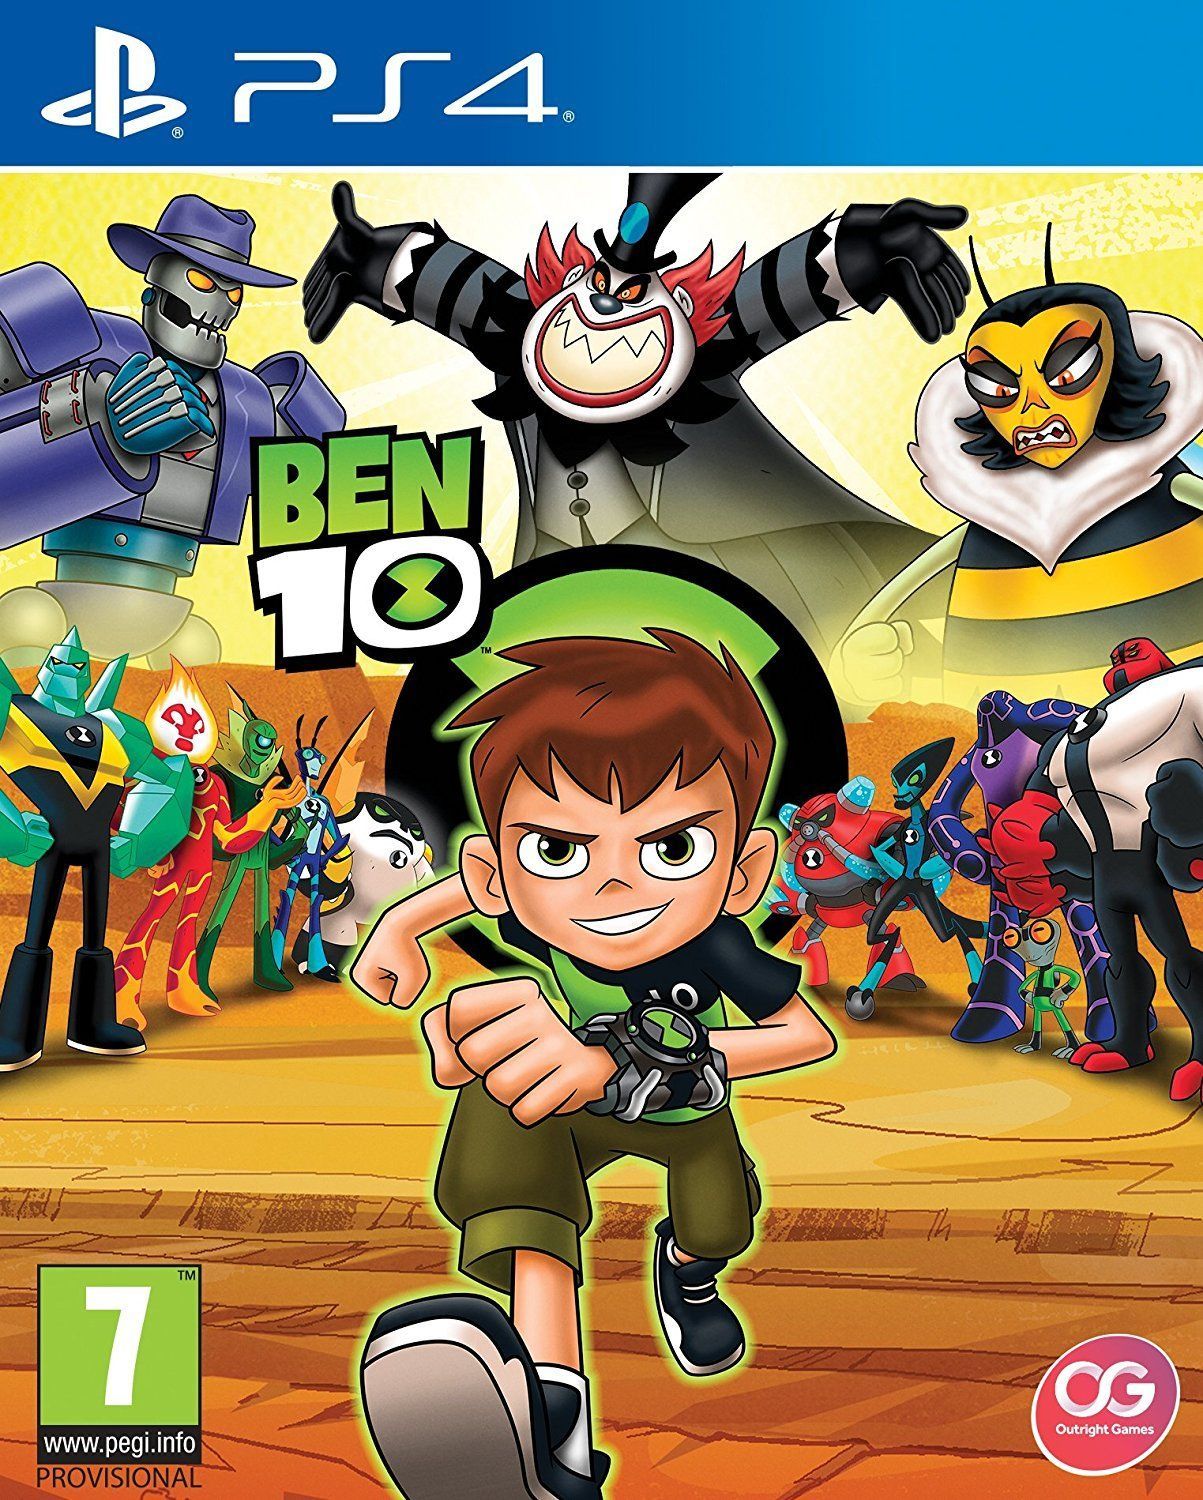 Ben 10 - Videojuego PC, NDS, Switch, Xbox One y Wii) Vandal